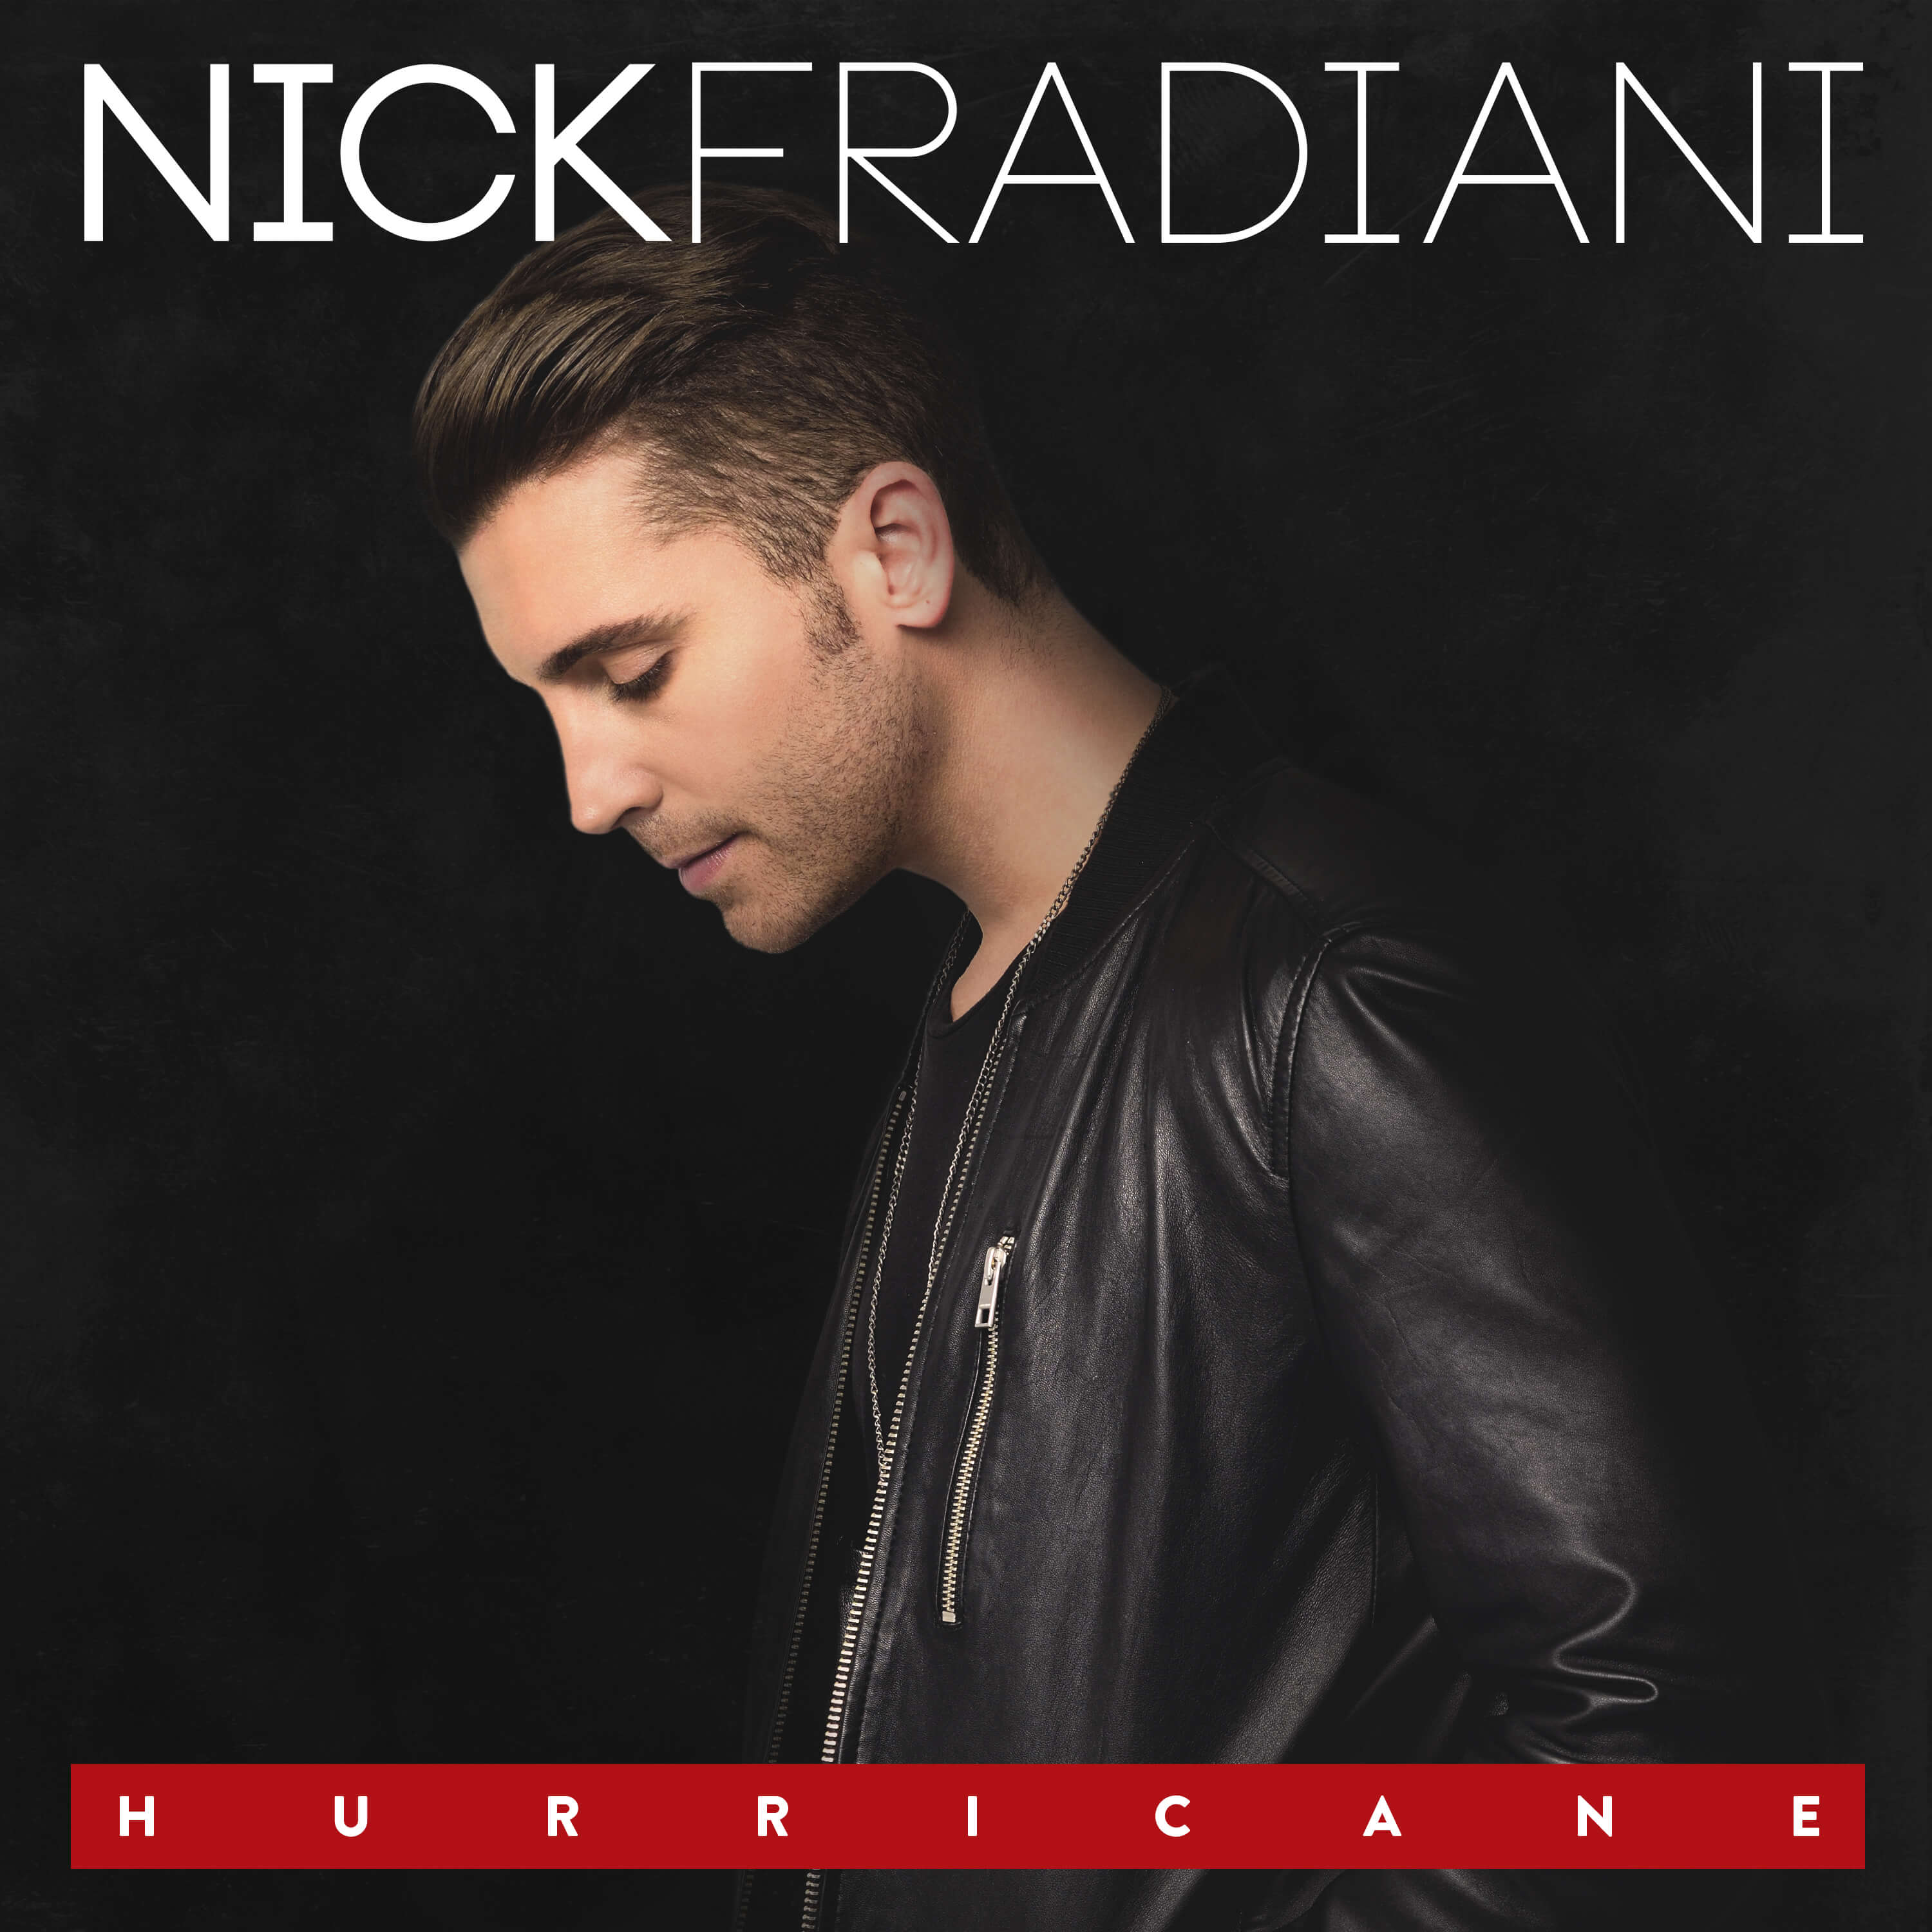 ‘American Idol’ Nick Fradiani Shares His Passion and Recipe for Success